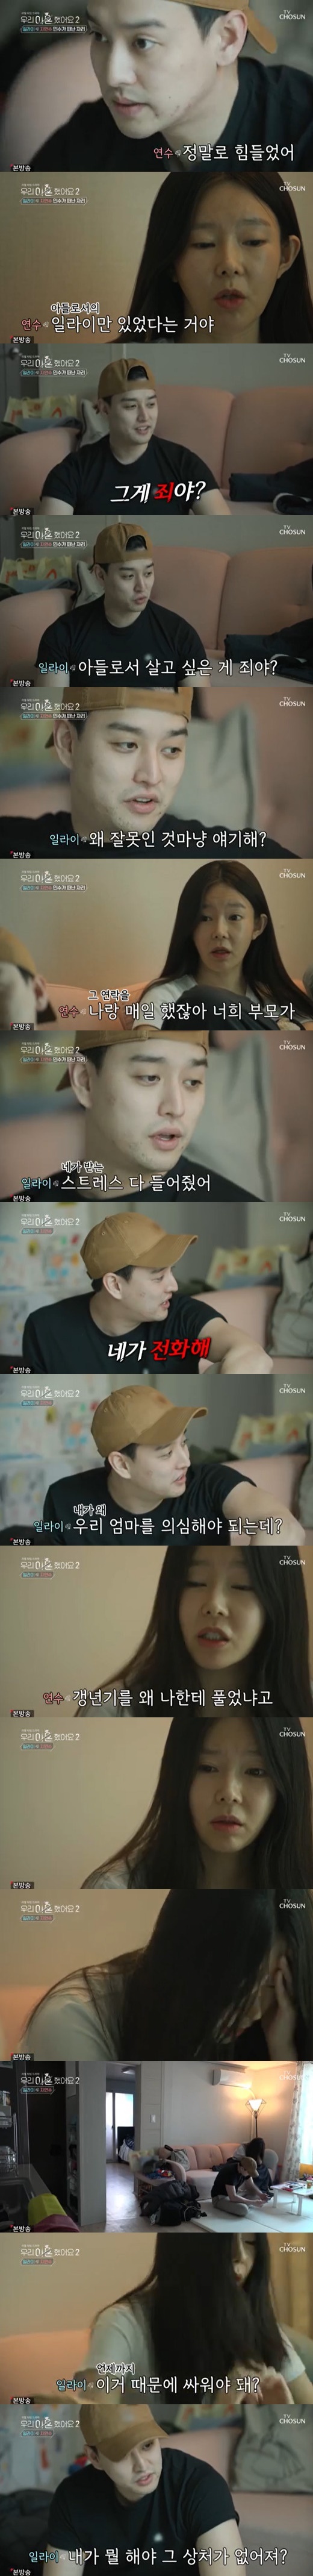 In We Divorce 2, Eli, a group of U-Kiss, expressed his anger to his ex-wife Ji Yeon-soo.In the 4th episode of We Divorce 2, a comprehensive channel TV broadcast on the afternoon of the 29th, Eli and Ji Yeon-soo were once again arguing about the Sidney Govou conflict at the time of marriage.Eli said, I think I became a garbage, but the reason I came in Korea was to get a little bit better with you.I wanted to tell Minsu that he was not a father like this, he said.But when I saw you and Minsu living here, I left my image and I was going to live quietly in United States of America, so I tried to make your life better.You have to keep working in Korea. Minsu came to show me someone who does not fight mother Father but wants to raise Minsu for Minsu.If you dont like that, okay, Ill just have to make a video call. You can tell him youre not coming in anymore.The conflict between Eli and Ji Yeon-soo, who had been divorced in We Divorce 2, exploded.In the 4th episode of We Divorce 2, a comprehensive channel TV broadcast on the afternoon of the 29th, Eli and Ji Yeon-soo were once again arguing about the Sidney Govou conflict at the time of marriage.On the day, Ji Yeon-soo told Eli, Can I be honest? I kept thinking about the things you said when you came to Korea.I never said anything about moving out of United States of America. Im sure. I dont add 10,000 won.You dont even know where you live in United States of America. Your parents made all the decisions, and thats what they said, and I didnt ask you to go.And it was really hard when I was there alone without anyone, and I was relying on you. Eli said, When we were in United States of America, we fought secretly.When you fight on the second floor and go down in a bad mood, your parents see my face and they know, of course, what is it that makes my son so hard, because he was up there, so they fought on top.Thats what my parents are thinking. Its like, Im fighting again and making my son hard.Eli said, So, I was bullied there, Ji Yeon-soo said, If you accept it, I can not talk about it.My parents are not those people, he said.Ji Yeon-soo said, But what I did not understand was that Eli as a son was hard, and there was no husband.Eli then said, Is that a sin? Is it a sin to live as a son? Did I contact my parents here? Should I call them once a month?, Ji Yeon-soo also said, What, here?You called me Moy Yat. Your parents. I didnt talk to my mother. And Im not wrong to live as a son. Eli said, Why do you say its wrong? I was next to you. I was your target. You listened to the stress you were under at my house.But how do we live there? I said, Is that how you live with them?Ji Yeon-soo said, Then the hard-working person is fine and you have to put up with it. So you kept telling me.Ive been deaf for three years, dumb for three, blind for nine years. You didnt say that? Call me. Tell me.Do not believe your mother. Call her now. Call her now. Quickly. How many times did you tell me that I could stand it? But Eli said, You just have to put up with it, thats right, because I was put up with it, but you didnt put up with it, you put up with everything, but you didnt.This is a hold-up. Eventually, I went out and told everyone, Listen to me. I told everyone, Im put up with it.What if I tell you. It doesnt change. Dont say that like I didnt do anything.I tried to be your shield, I told my parents not to do it for you, and you stopped me from the side.Ji Yeon-soo revealed, Your mother met her wife, but her son and mother were a thousand years old, and she was trying to stop it. Eli said, My mother does not say that.You call and check. Why should I suspect my mother. I dont want to doubt her anymore. Yeah, its been tough.Ji Yeon-soo appealed, Why do you release menopause? That long time? And Eli said, Dont tell me, tell him. Why should I listen?Is I your bodyguard?Eli said, When do I have to fight this? What do I do to get rid of it? What do I have to do?Dont you want to get out of it?I want to get off, I cant think of it if youre in front of me, Ji Yeon-soo said.